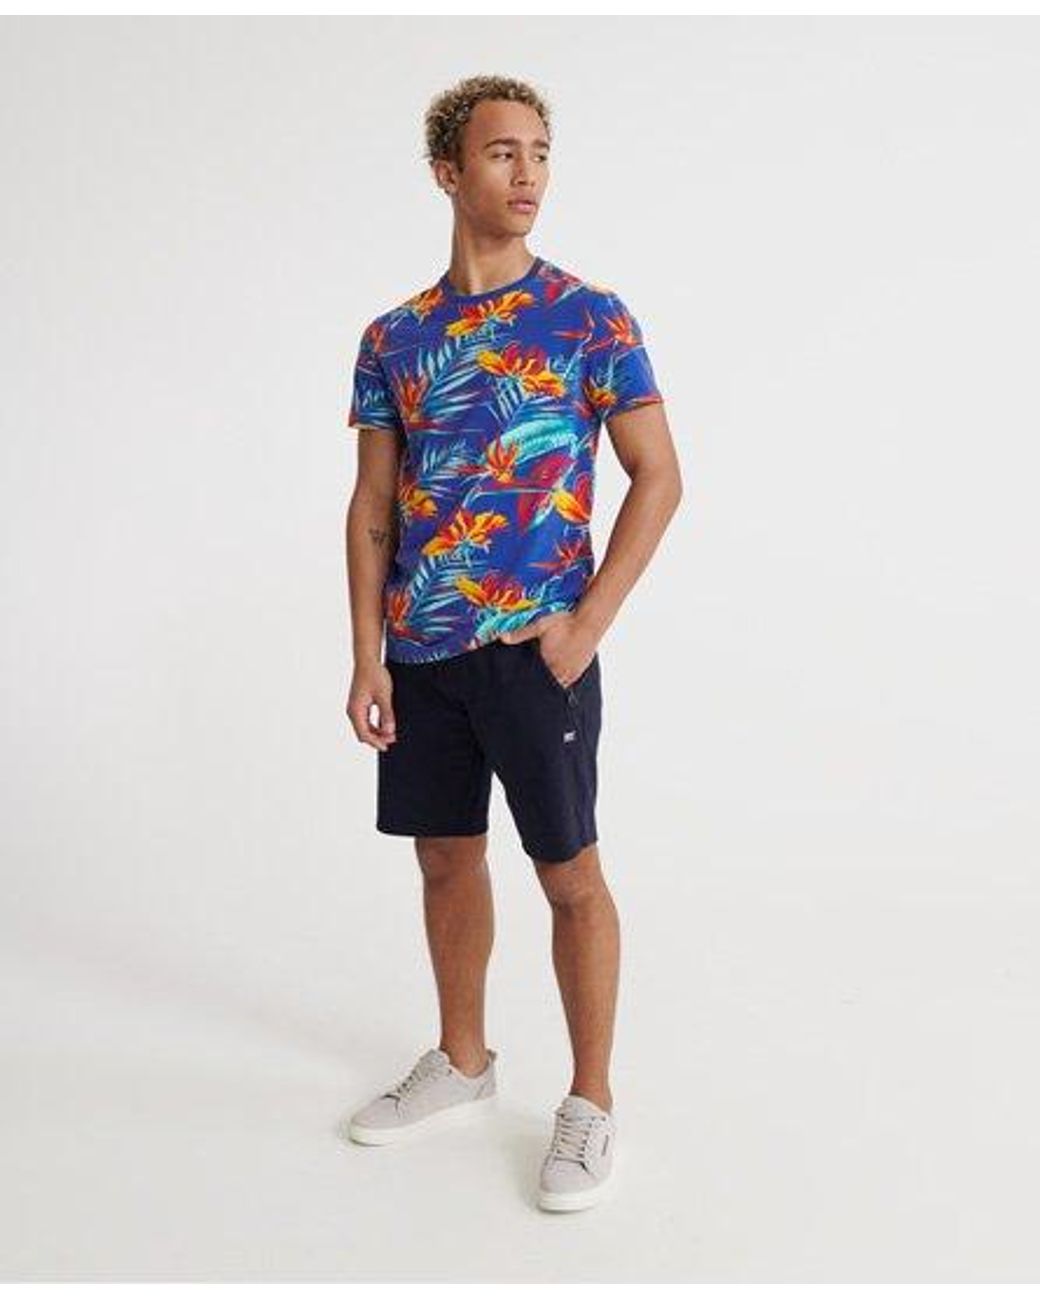 SUPERDRY ALL OVER PRINT FLORAL T-SHIRTS HERRENKLEIDUNG WEISS,BLAU T-SHIRTS